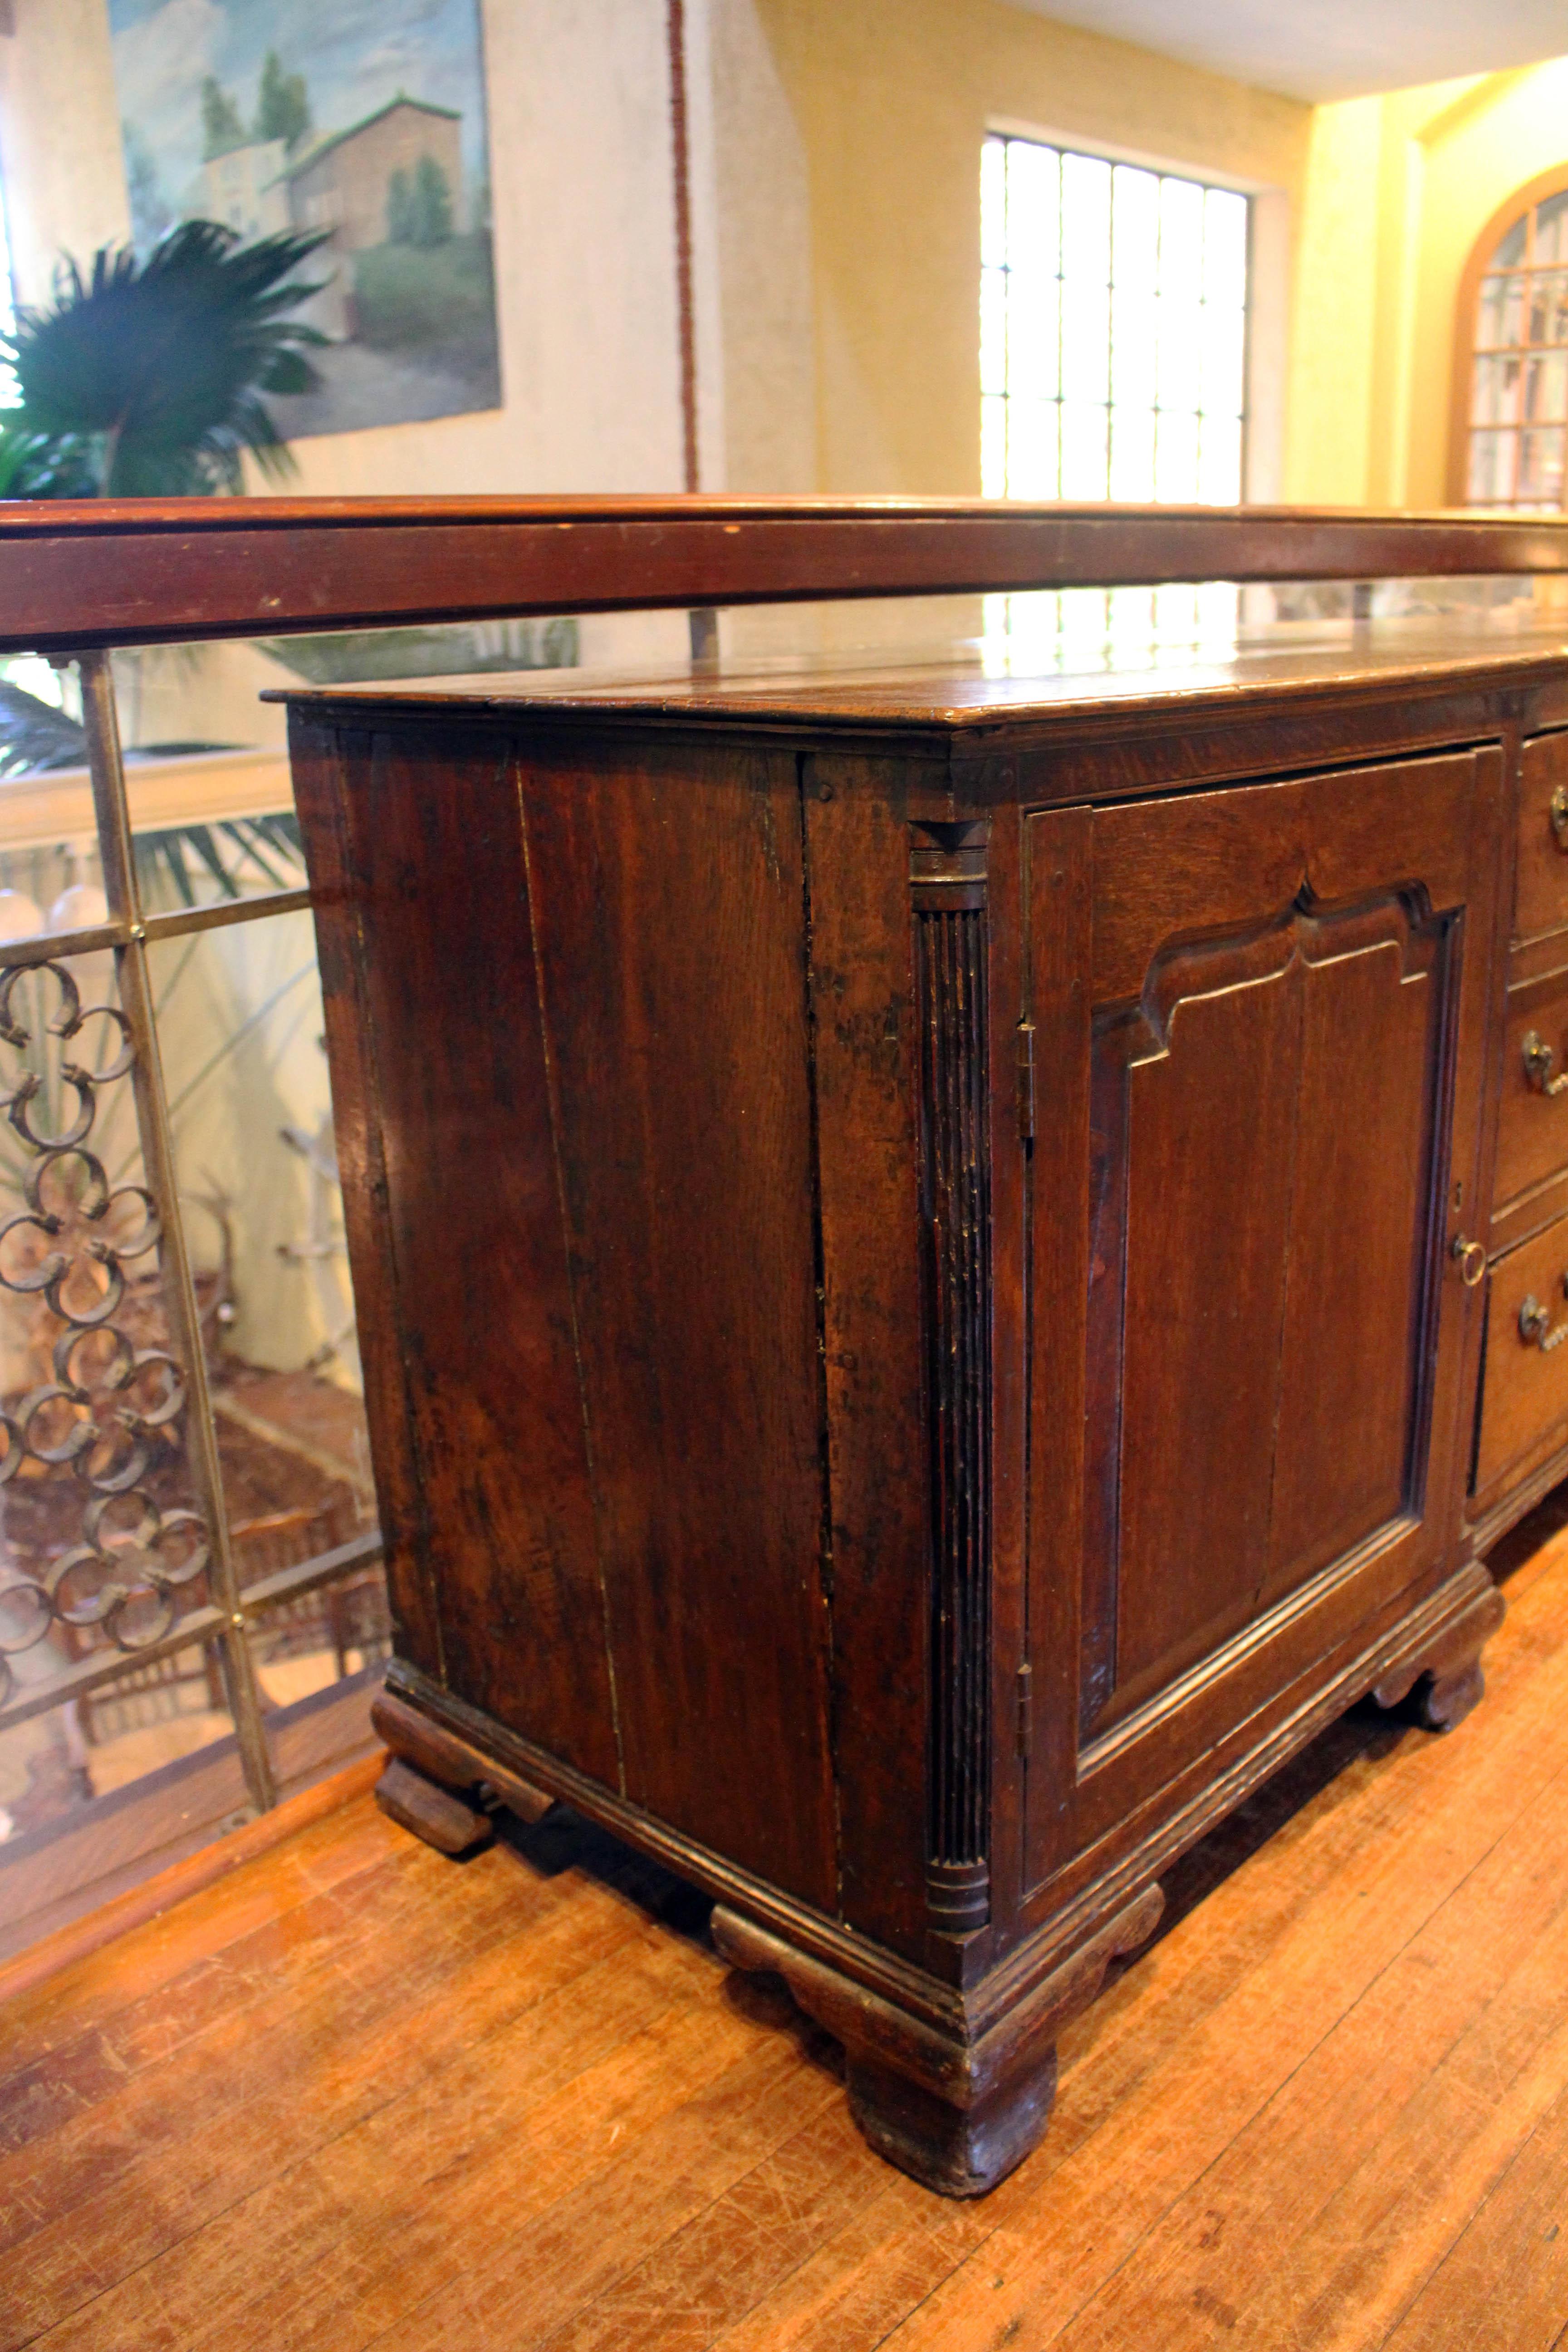 Mid-18th century Georgian dresser base, English, breakfront form. Wonderful mellow oak. Drapery fold panel effect carved doors reflect the influence of earlier design, well molded. Four reeded quarter column corners, flanking the two end cabinets,